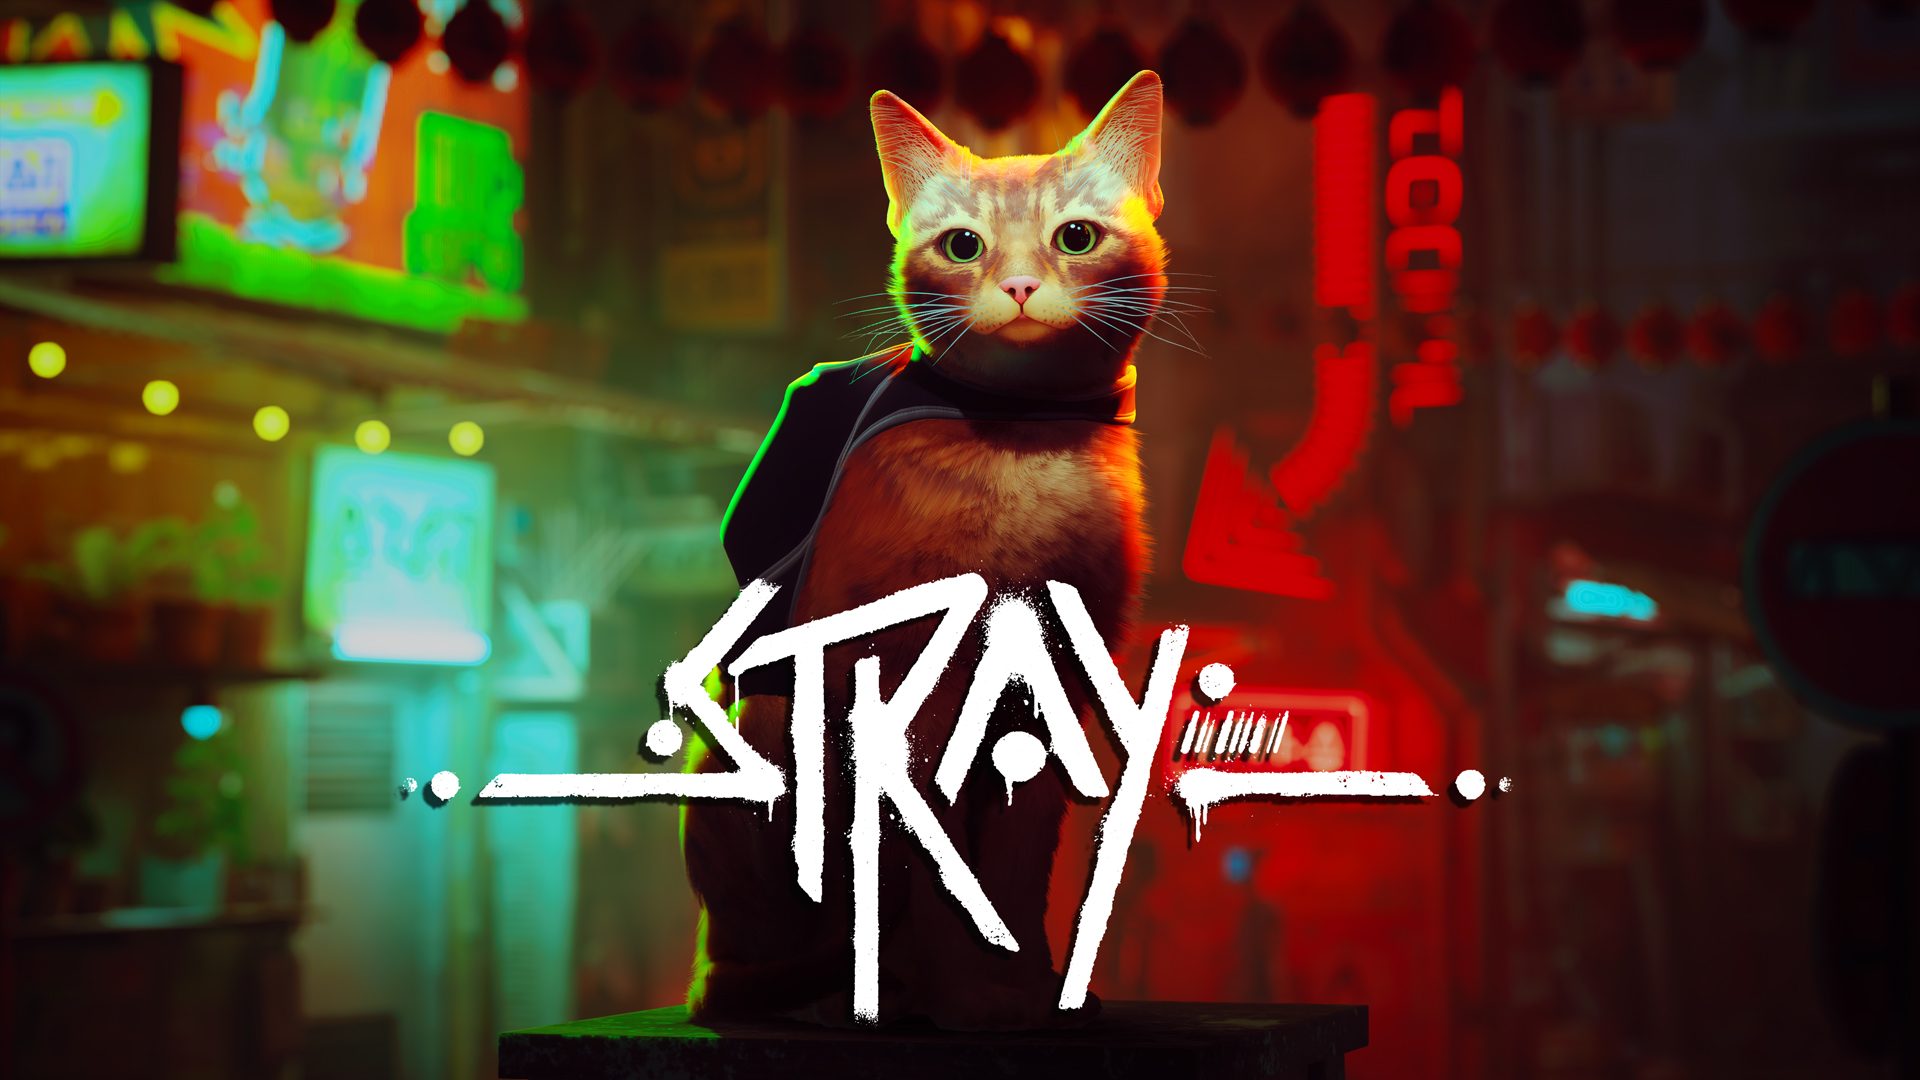 Stray comes to PS4 and PS5 July 19 as part of PlayStation Plus Extra and Premium –